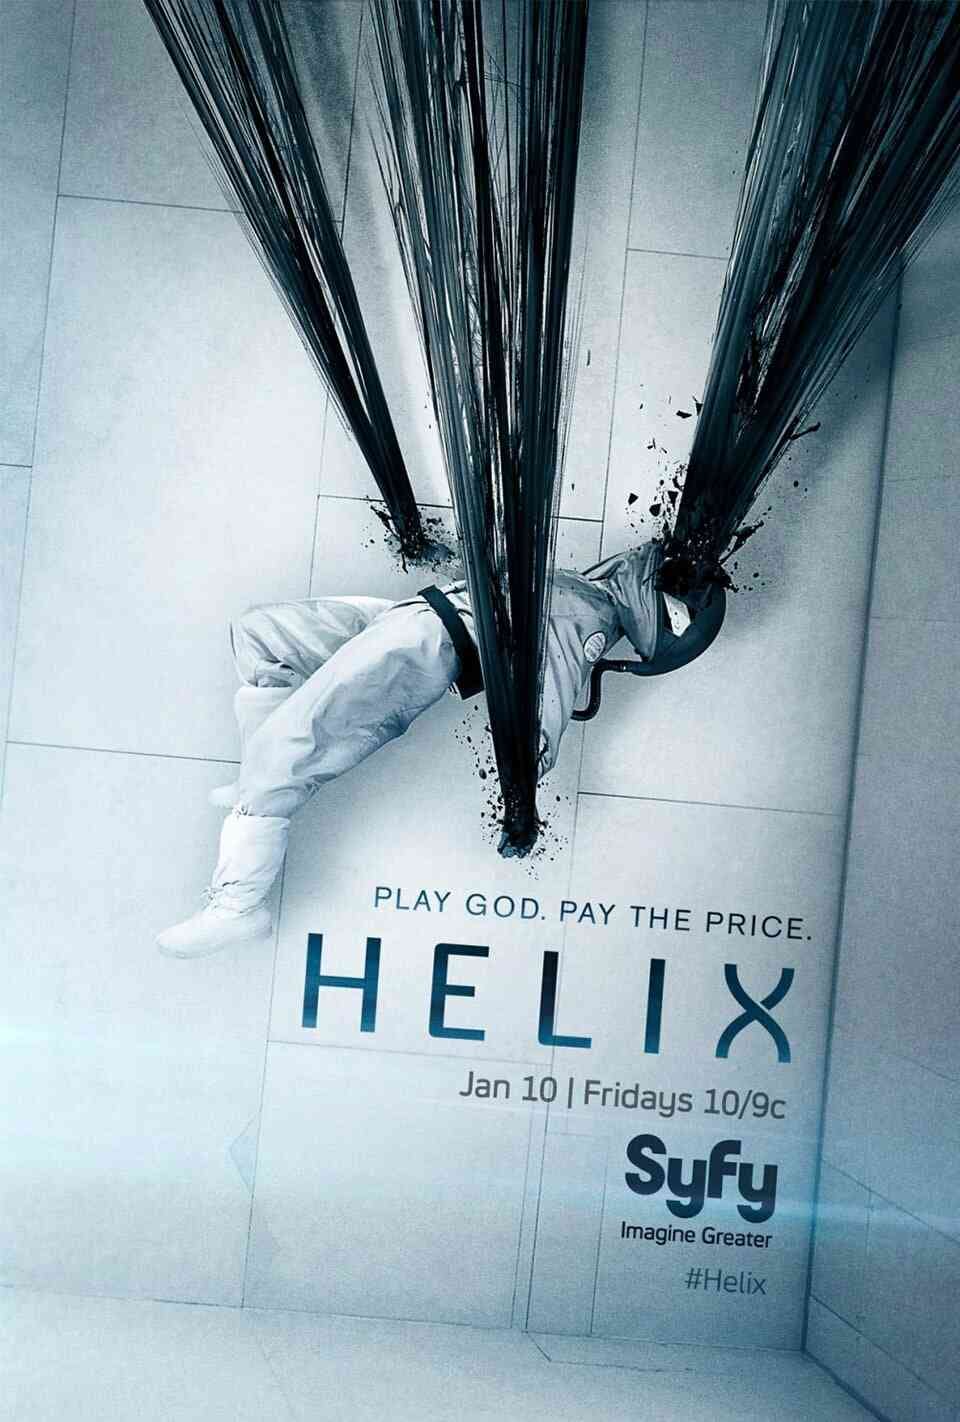 Read Helix screenplay (poster)